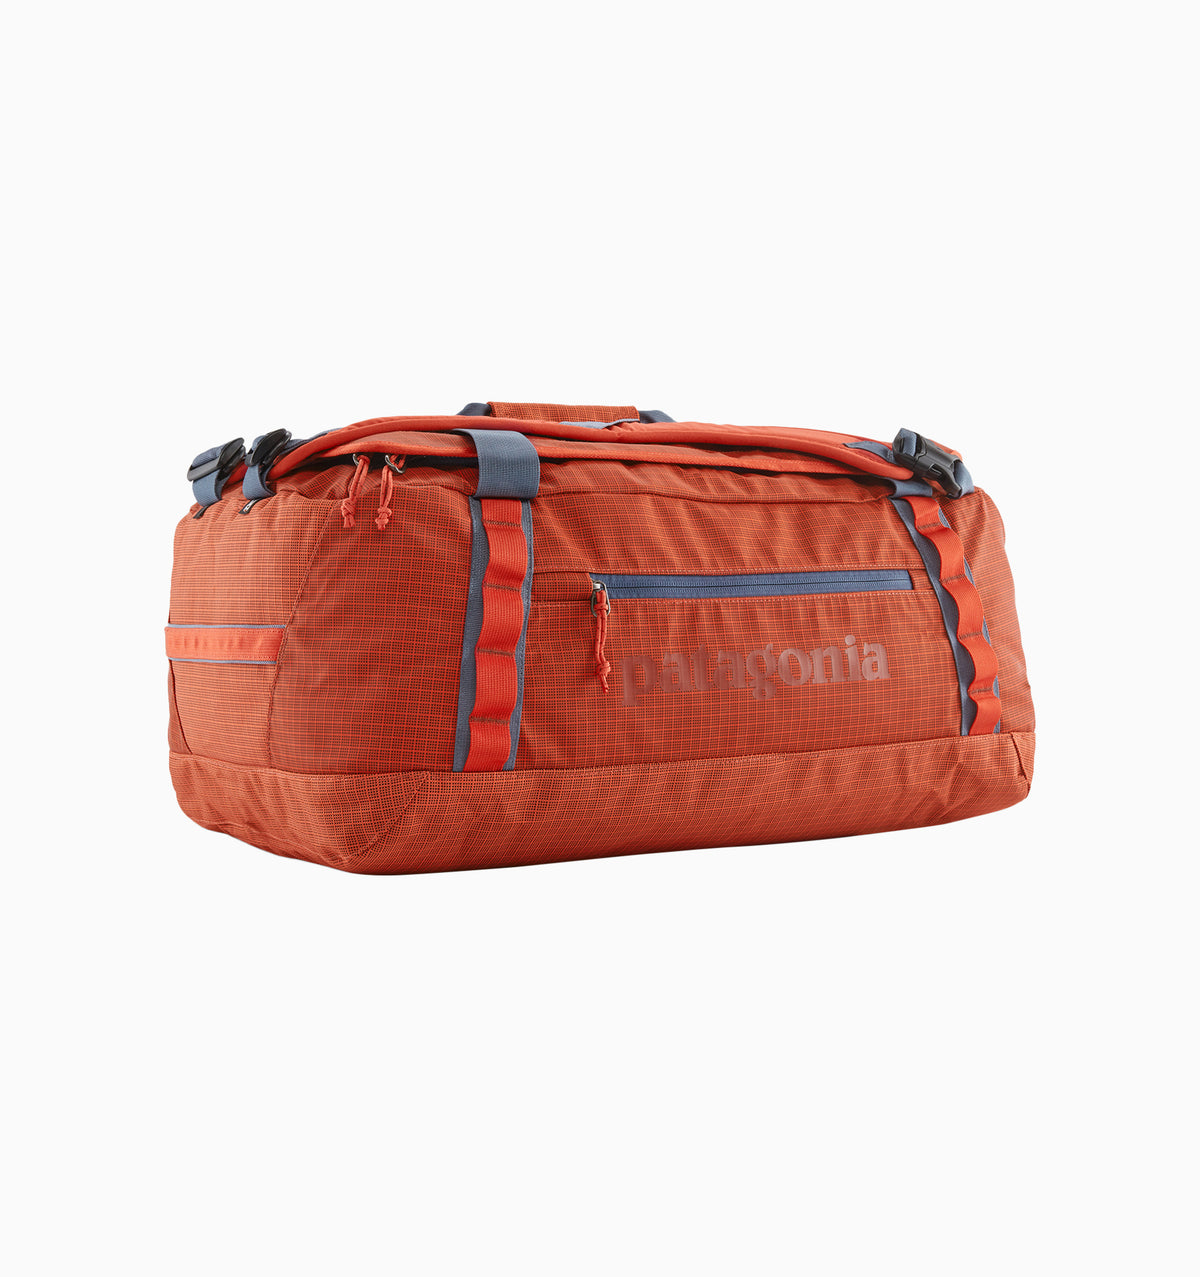 Patagonia Black Hole Duffel 40L - Pimiento Red